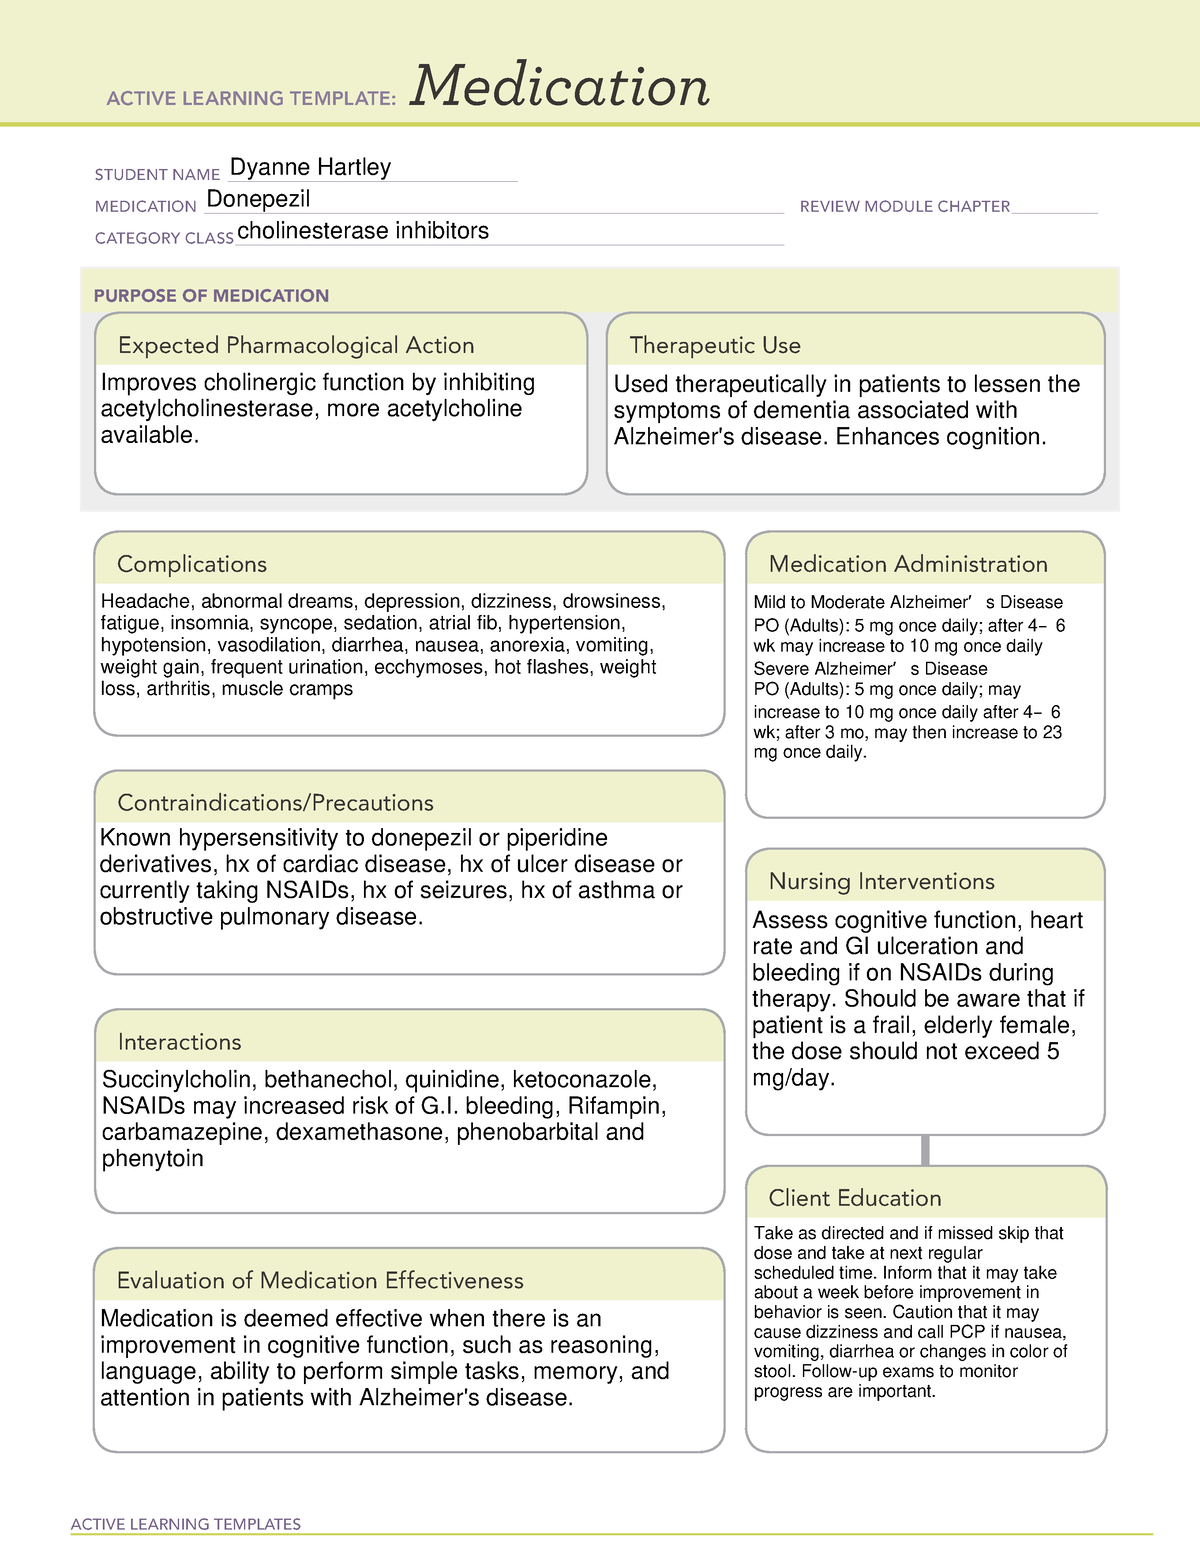 donepezil-ati-active-learning-templates-active-learning-templates